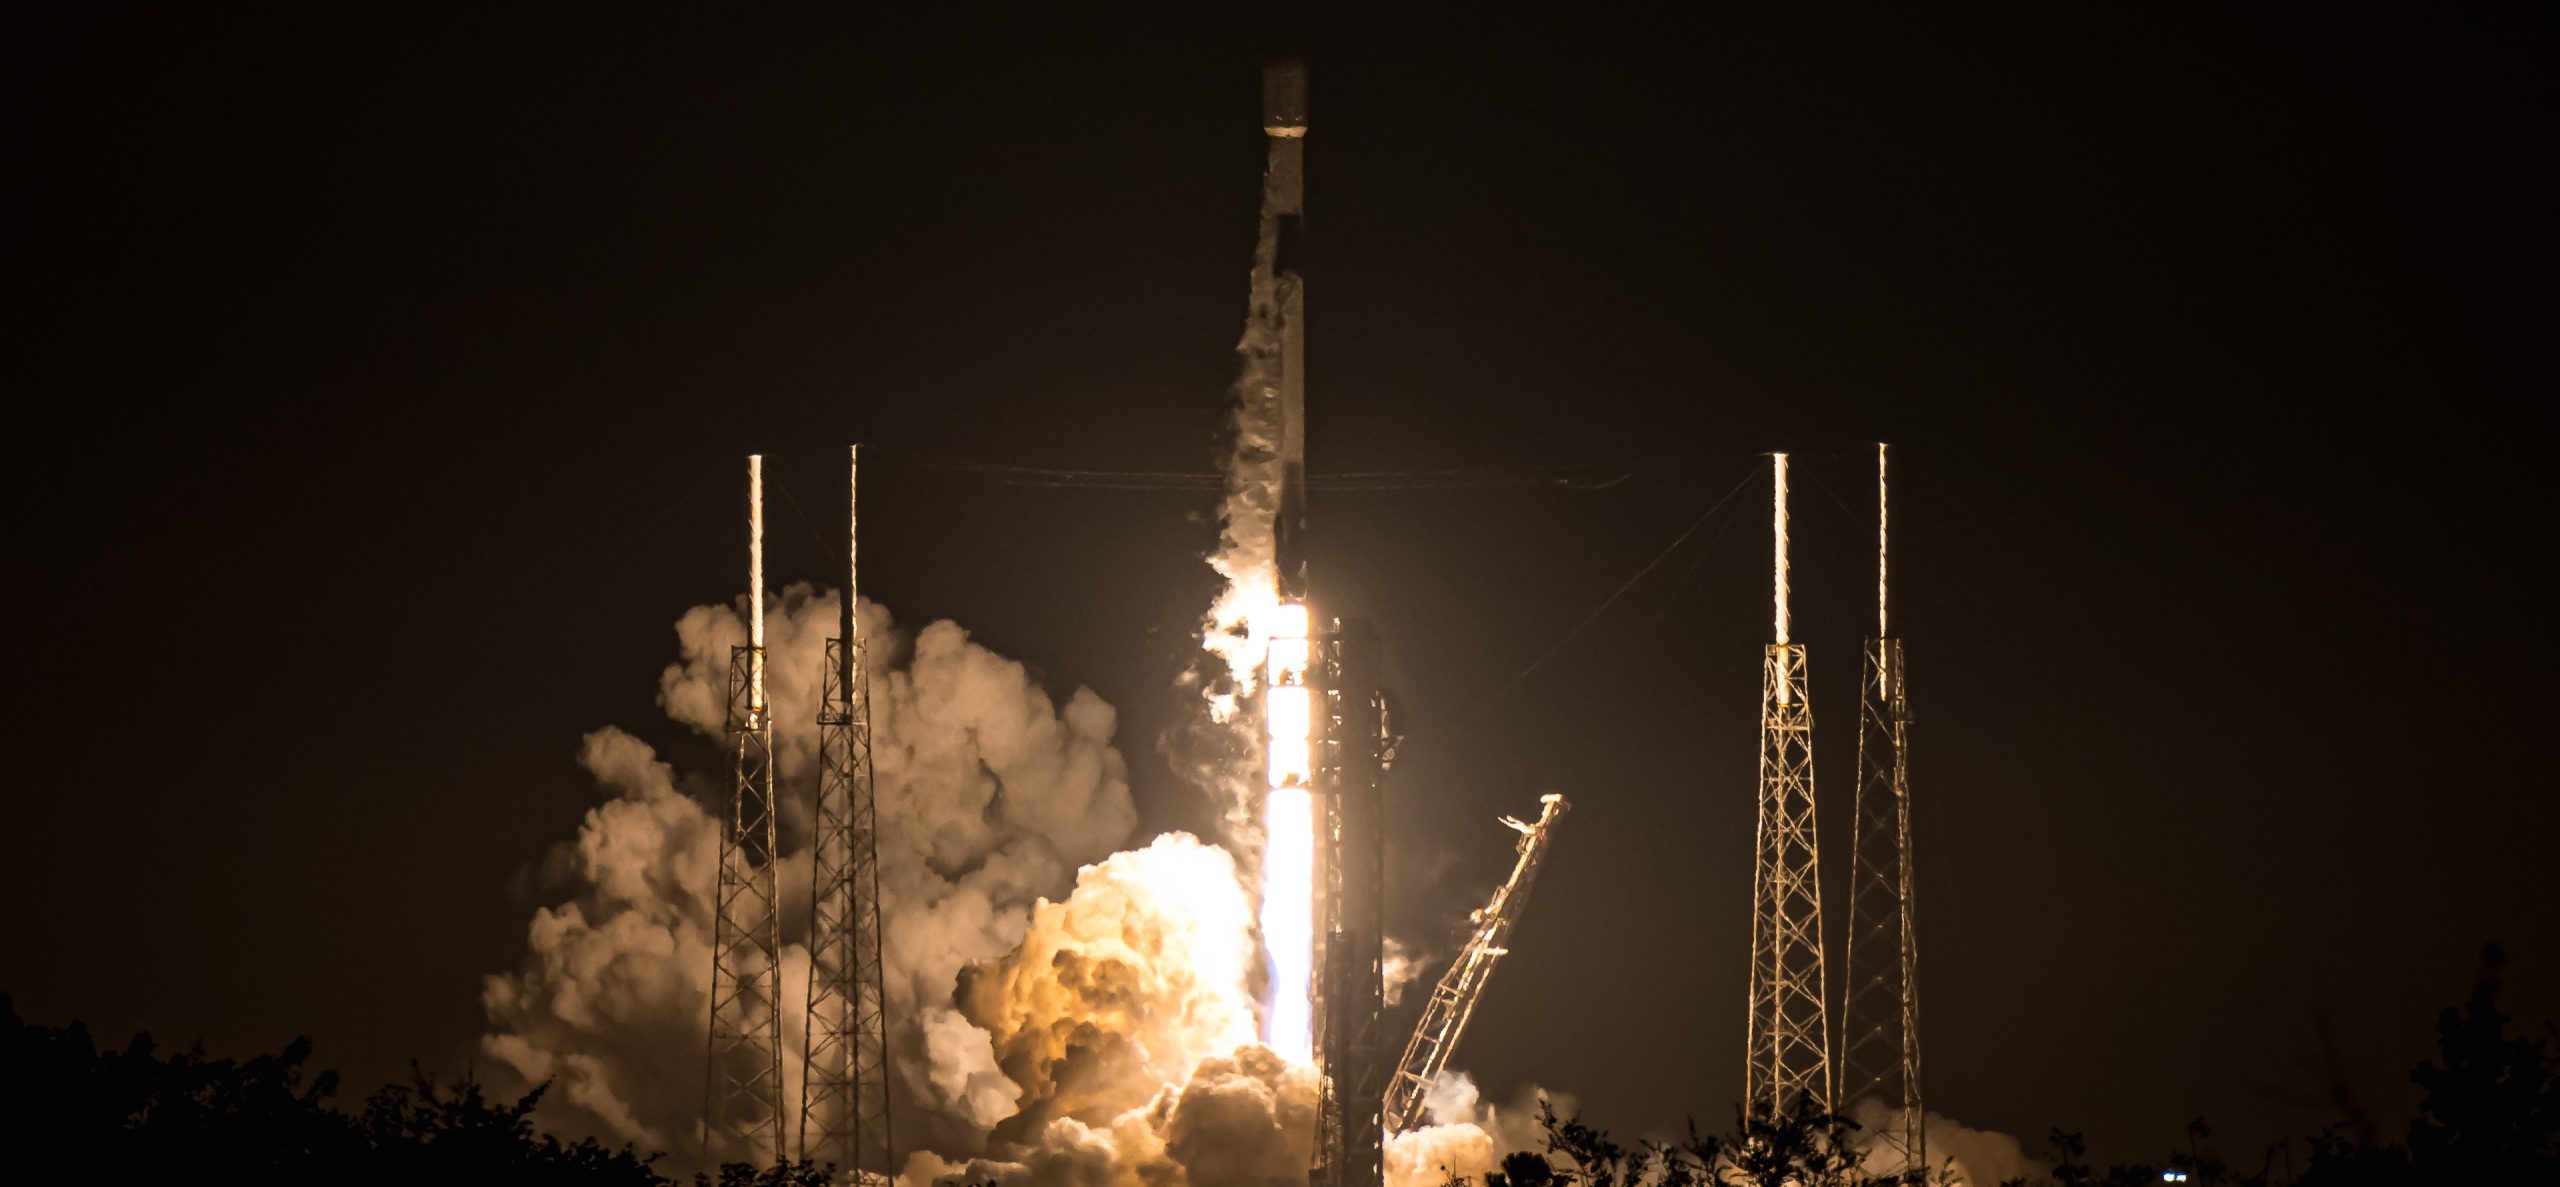 SpaceX continues its march to 100 launches in one year